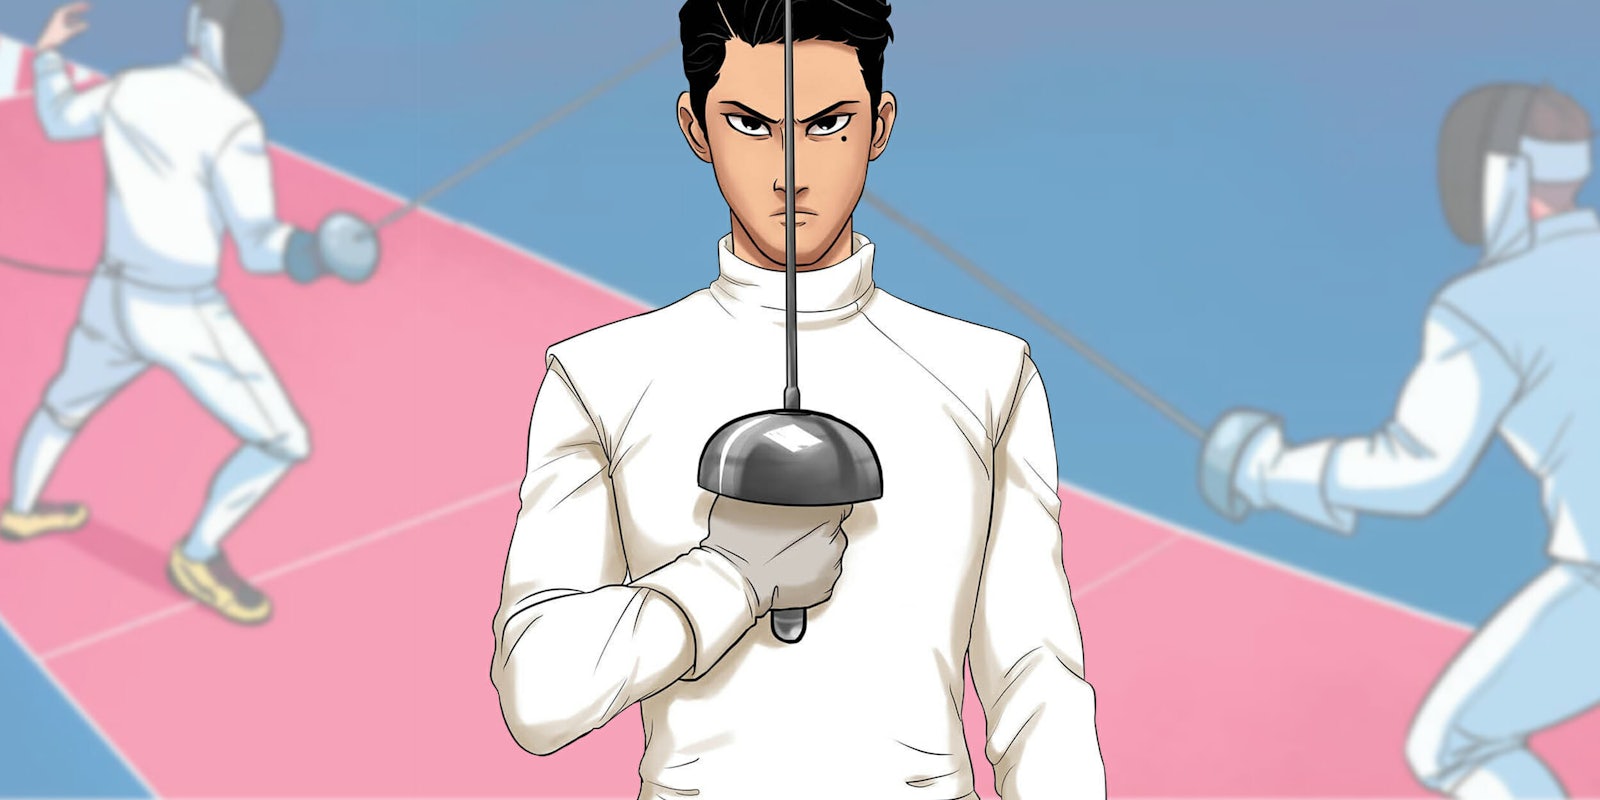 Young man holding epee in front of fencers